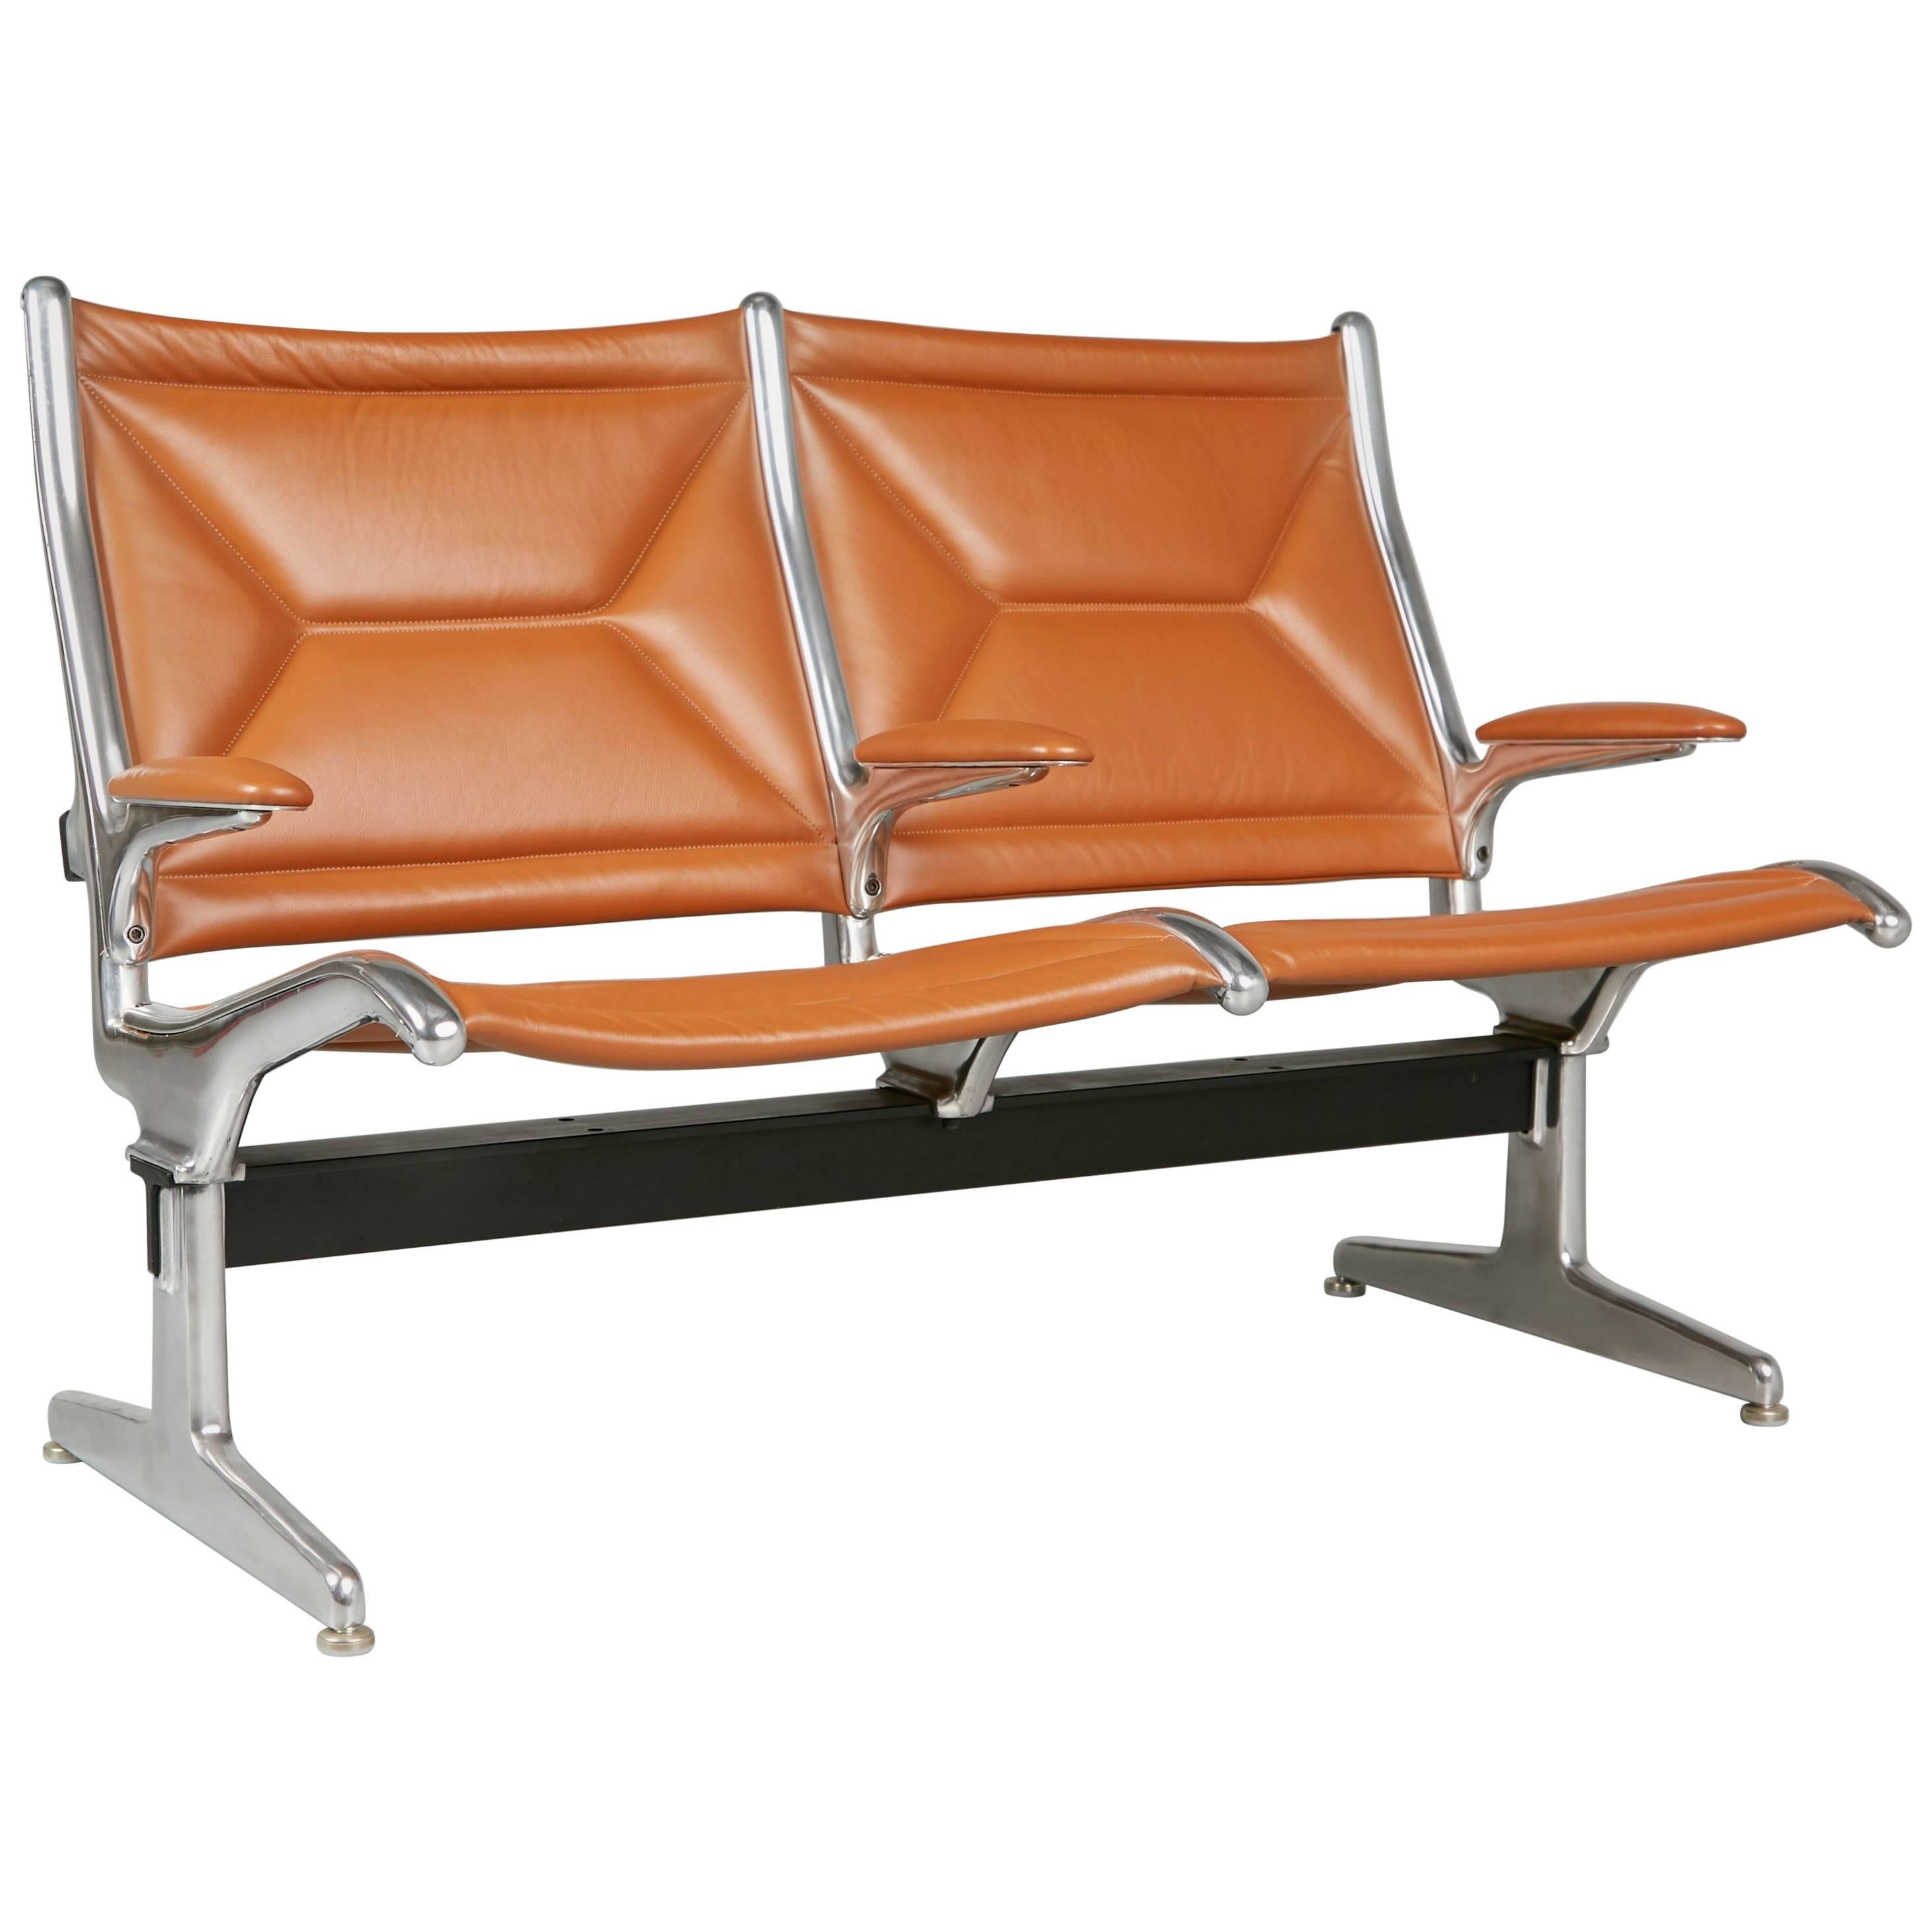 Edelman Leather Two-Seat Tandem Sling by Charles Eames for Herman Miller